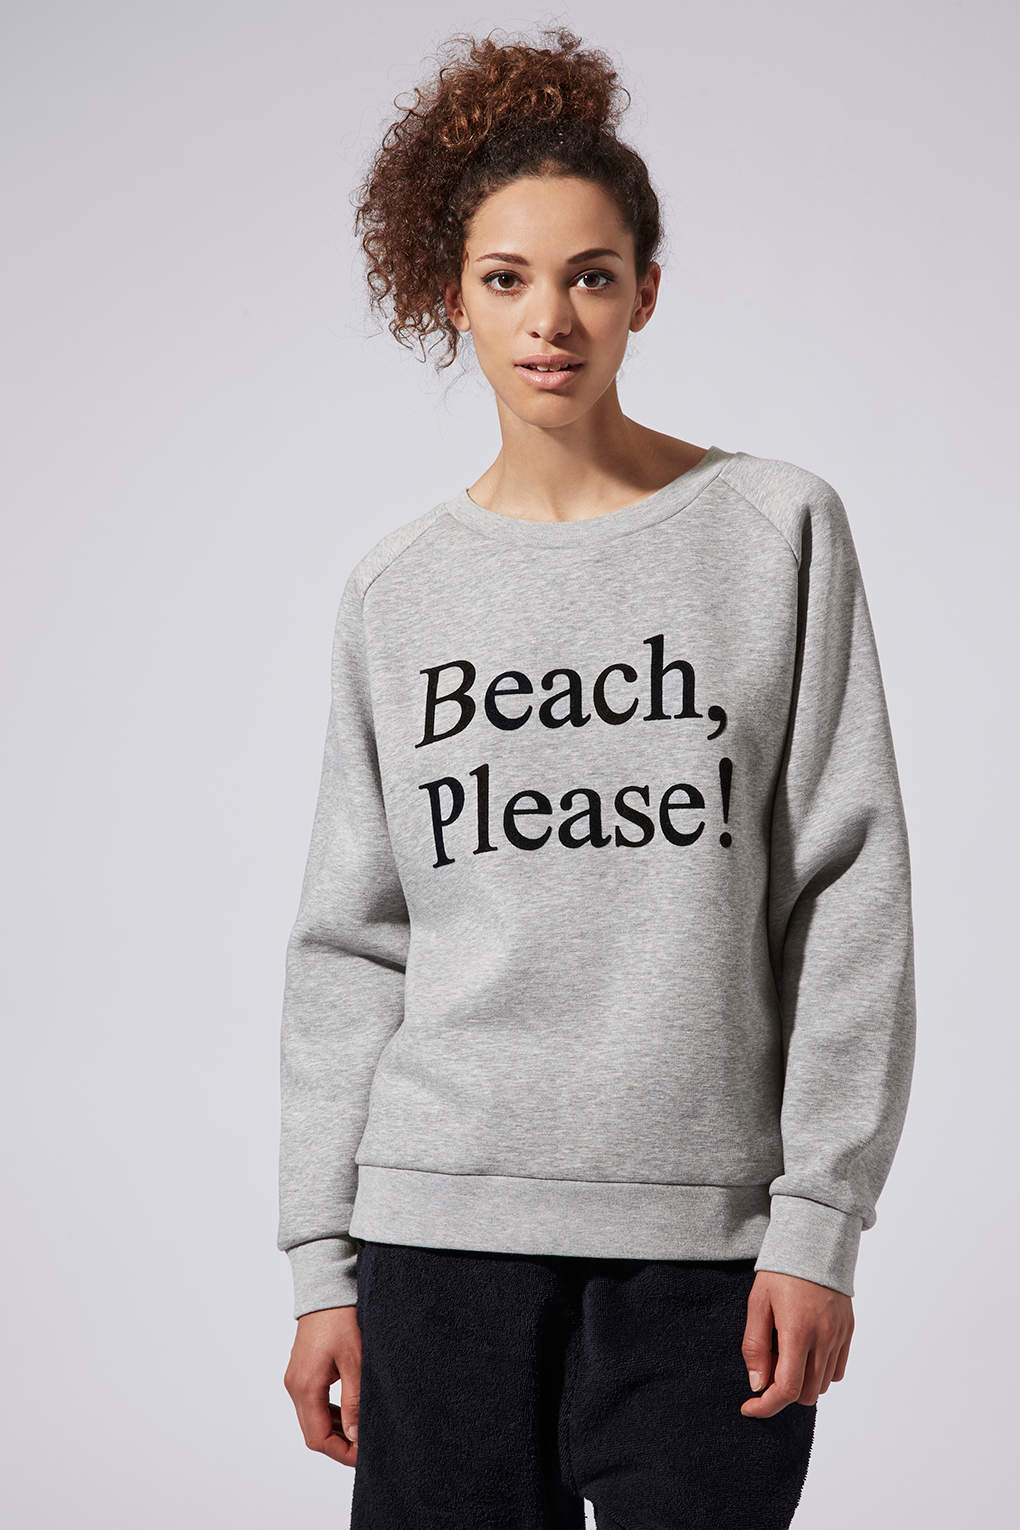 Lyst - Topshop Beach Please Sweat By Ashish X in Gray